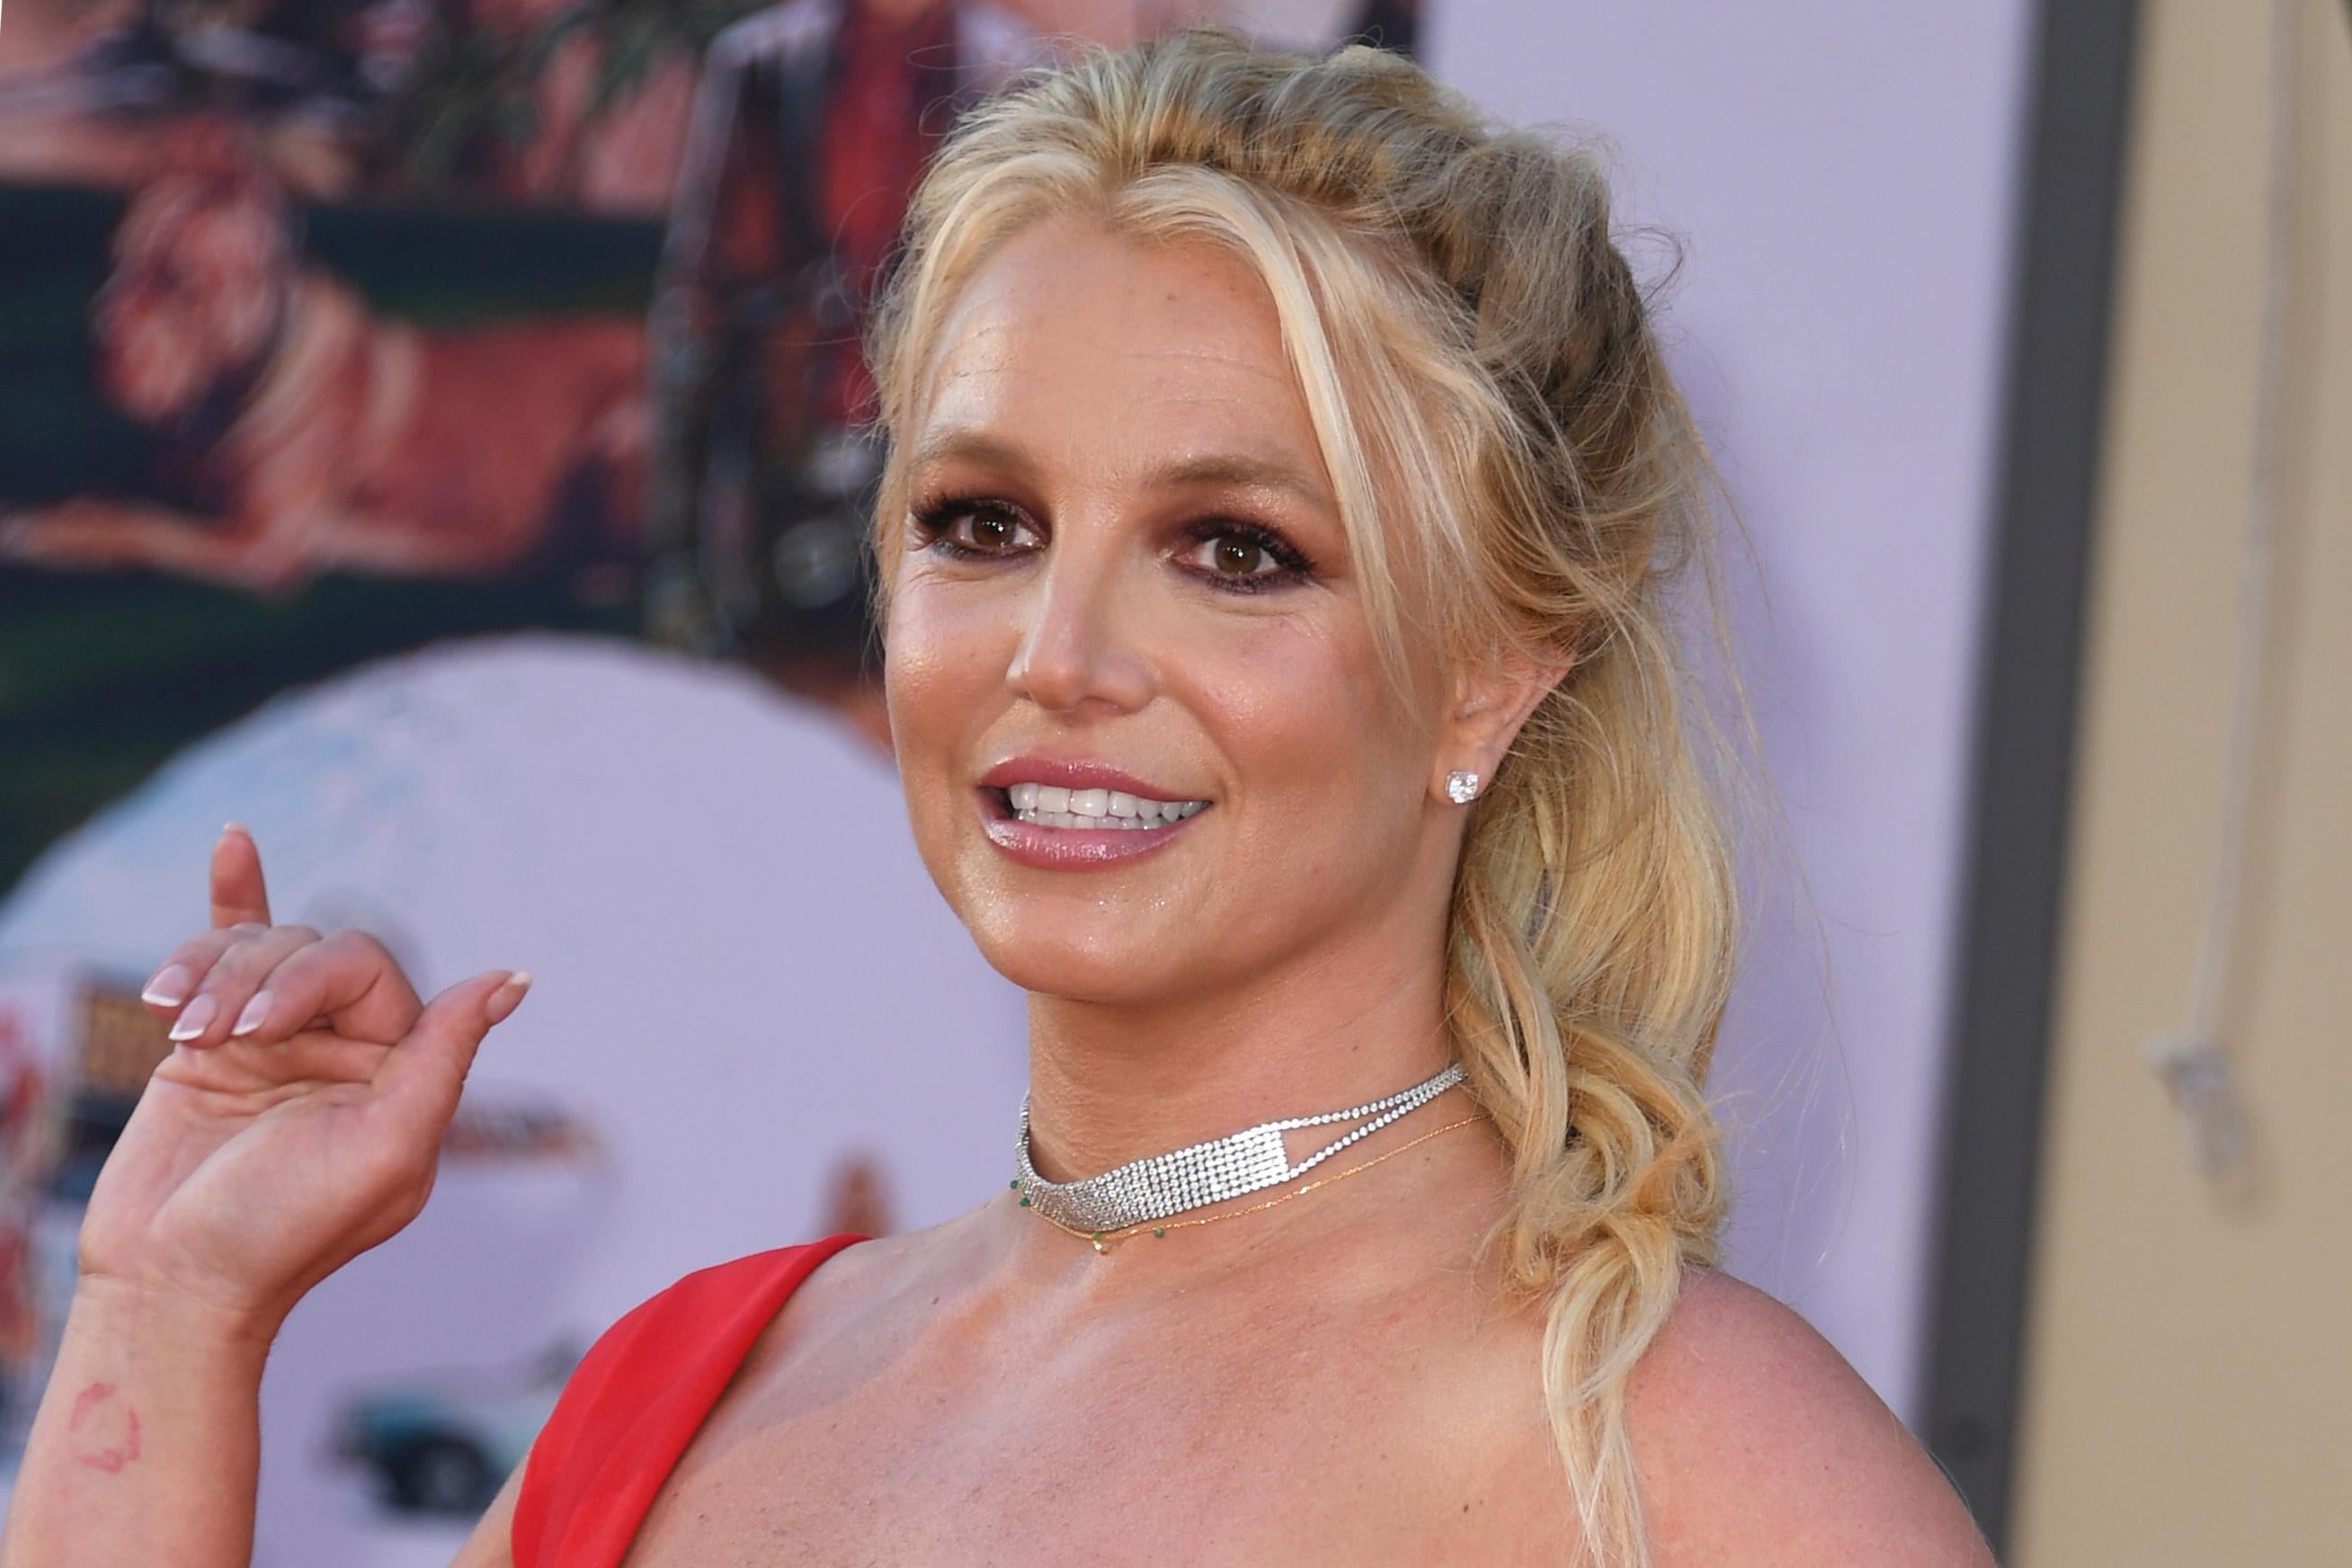 Britney Spears smiles and waves at a premier.